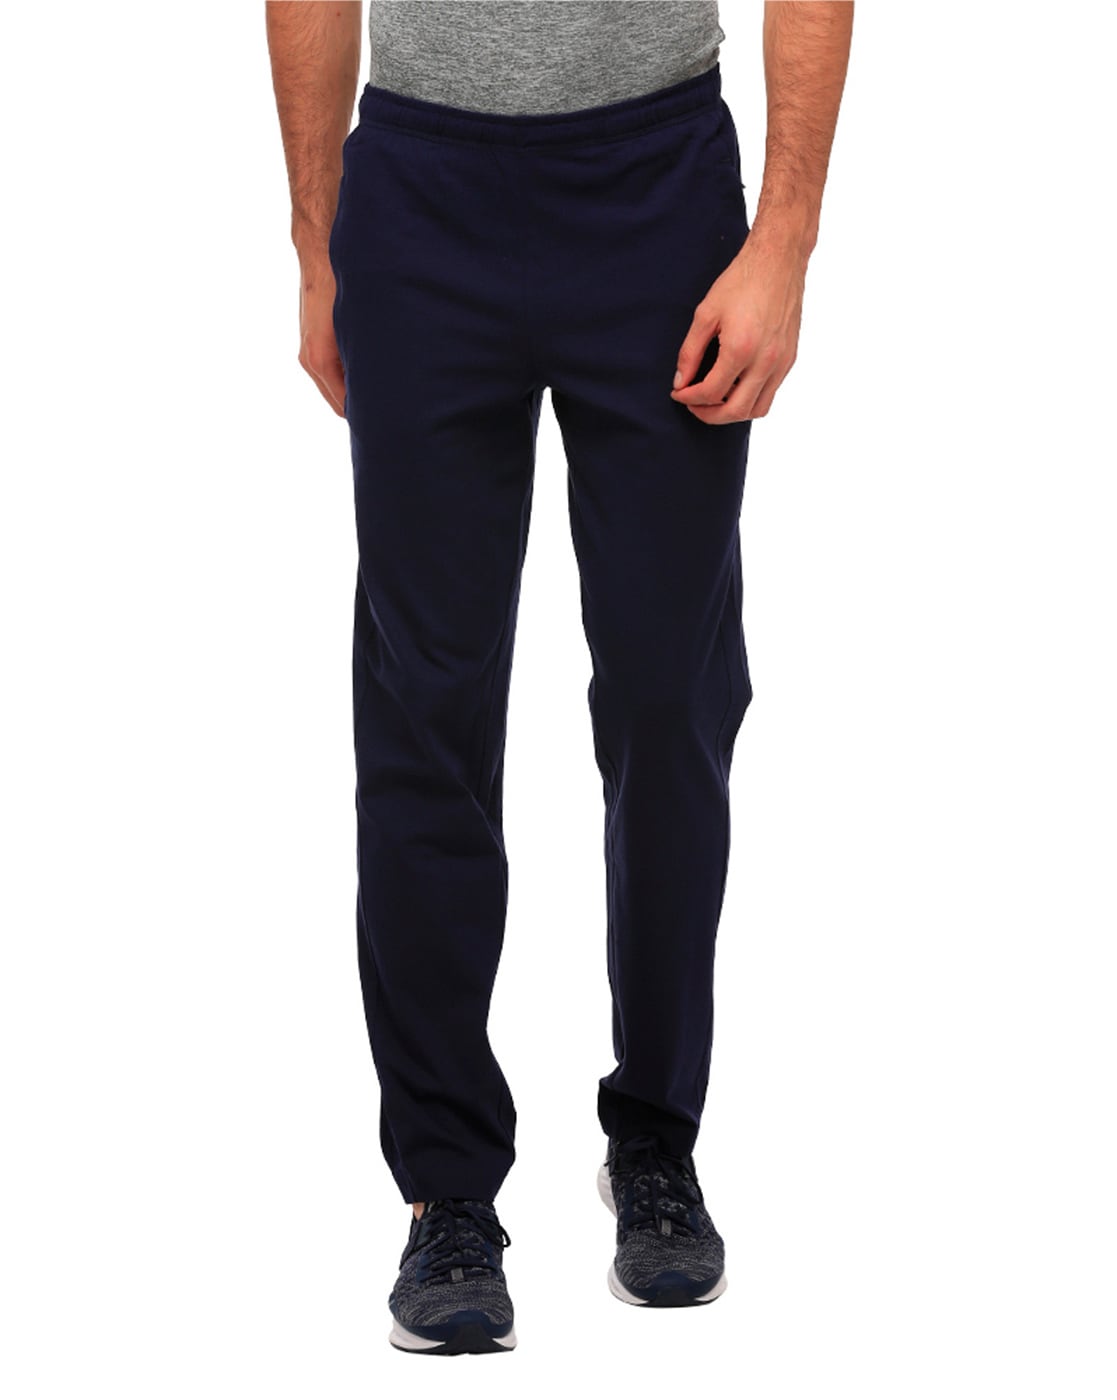 Buy Blue Track Pants for Men by Puma 